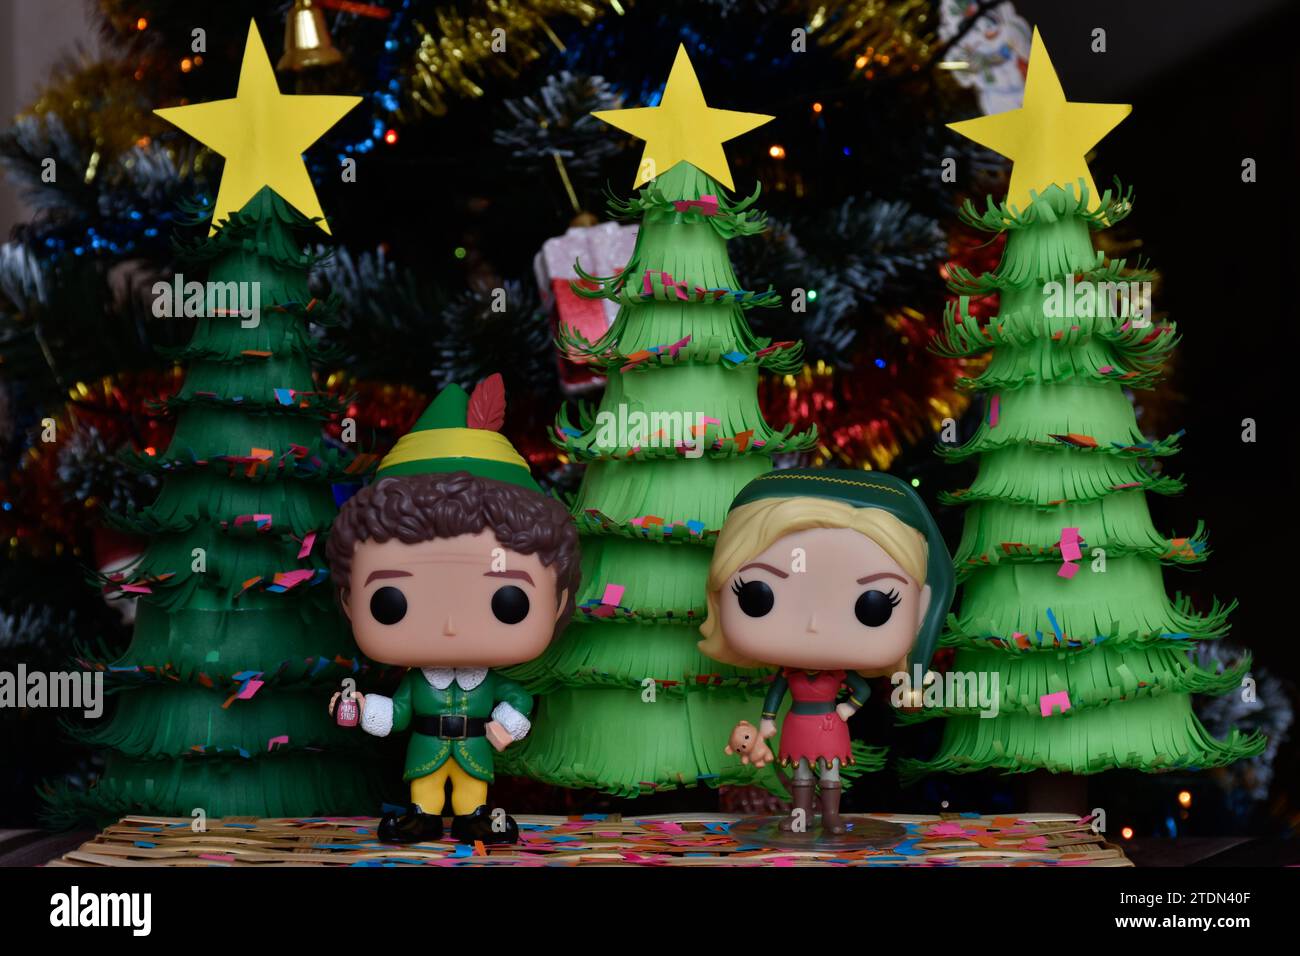 Funko Pop action figures of Buddy and Jovie from family comedy movie Elf. Handmade paper Christmas trees, ornaments, confetti, garland, festive decor. Stock Photo